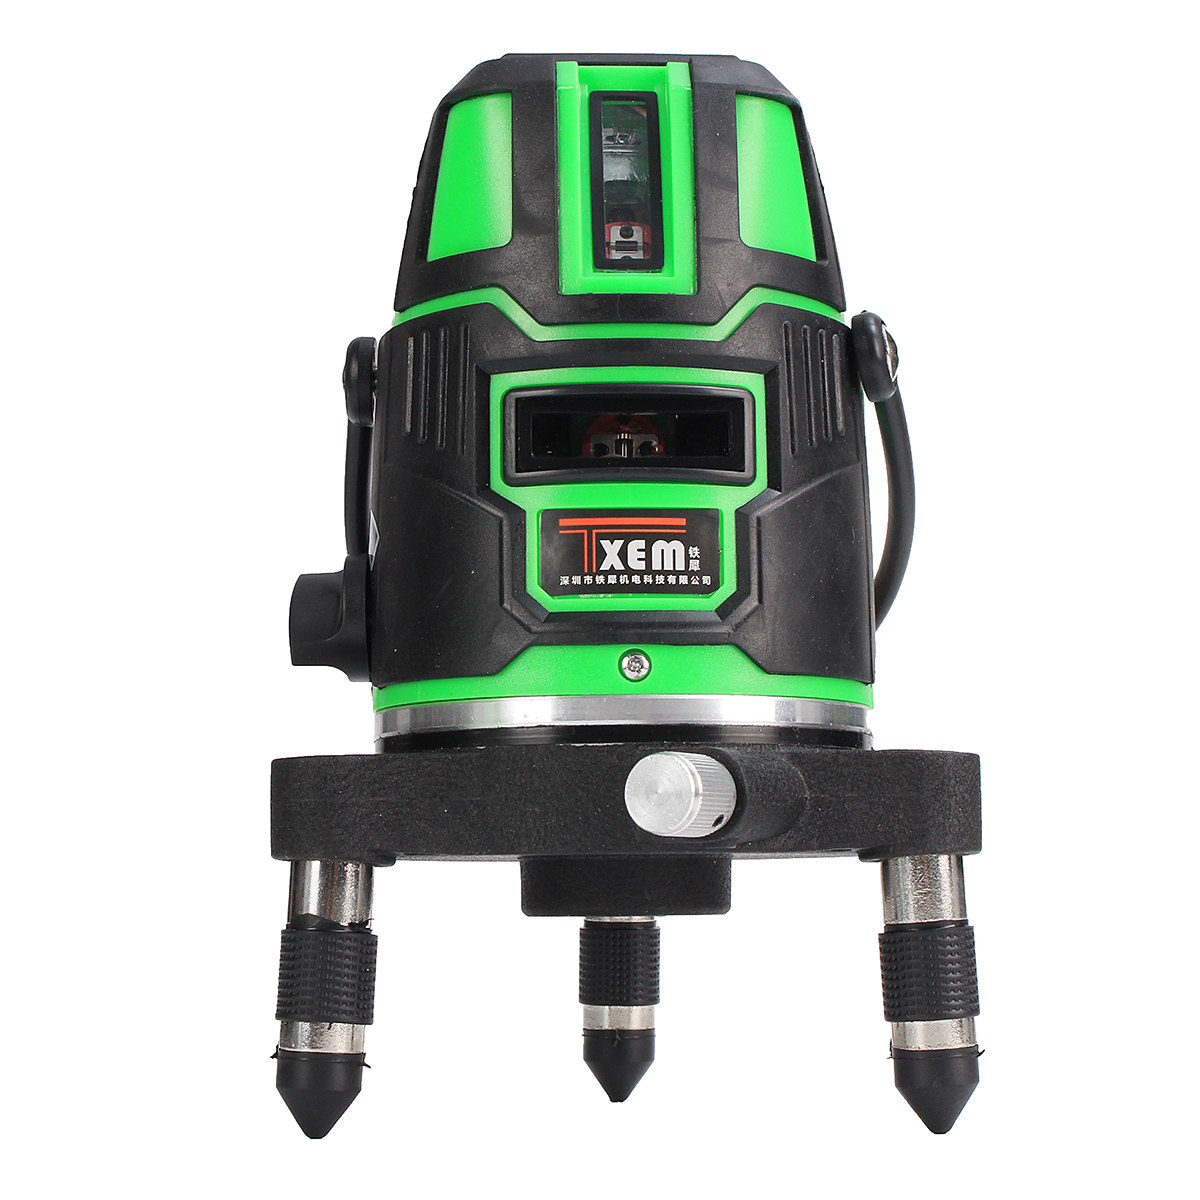 Pangding Level Meter 1pc Level Green 8-Line Self Leveling Crosses Line 360° Rotarys Leveling Tool 